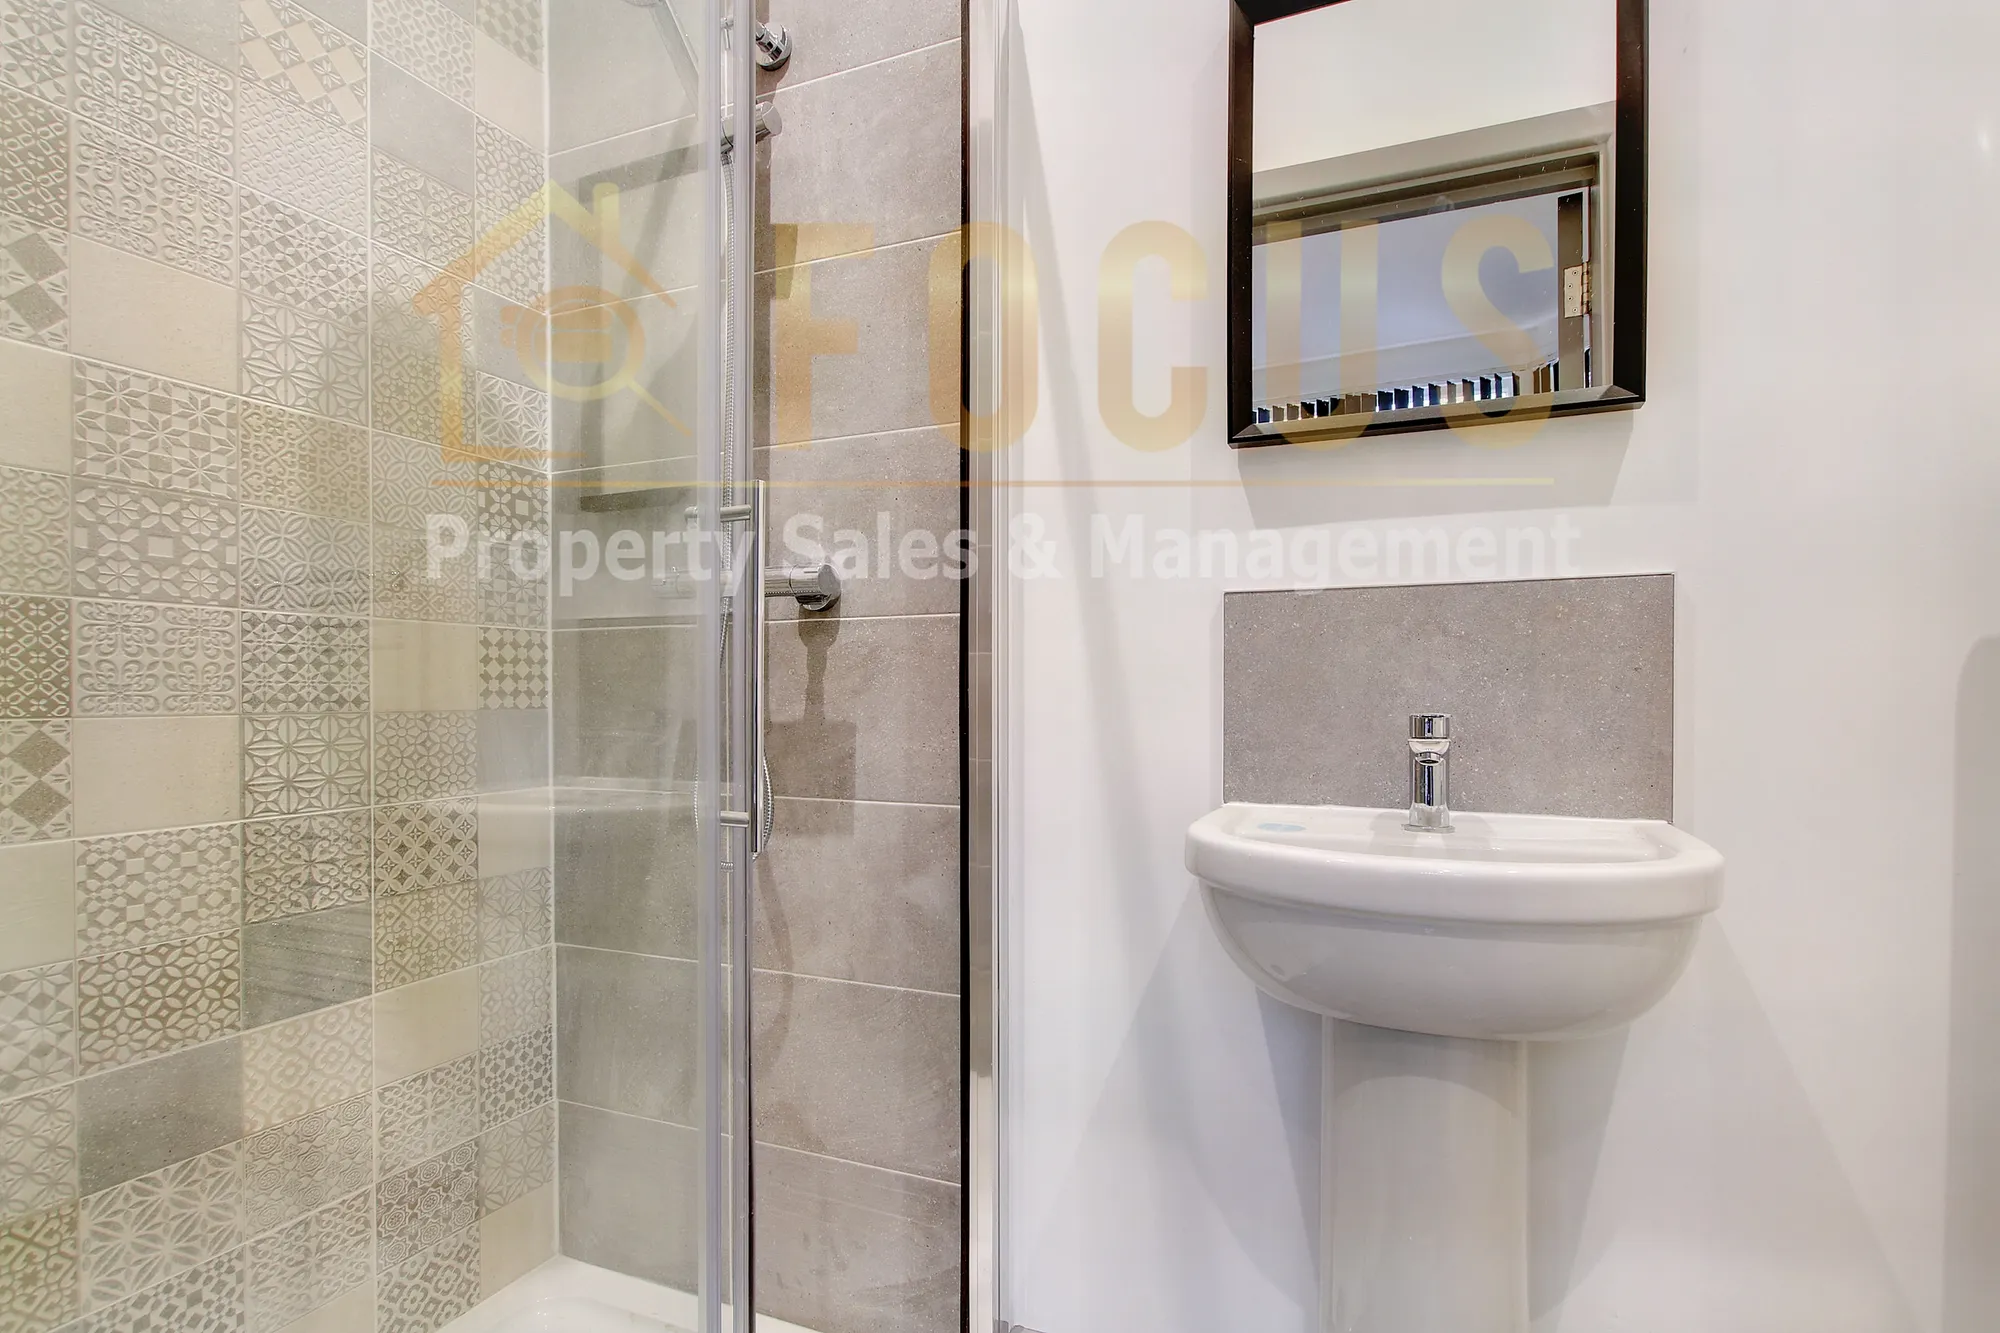 6 bed mid-terraced house to rent in Stretton Road, Leicester  - Property Image 21